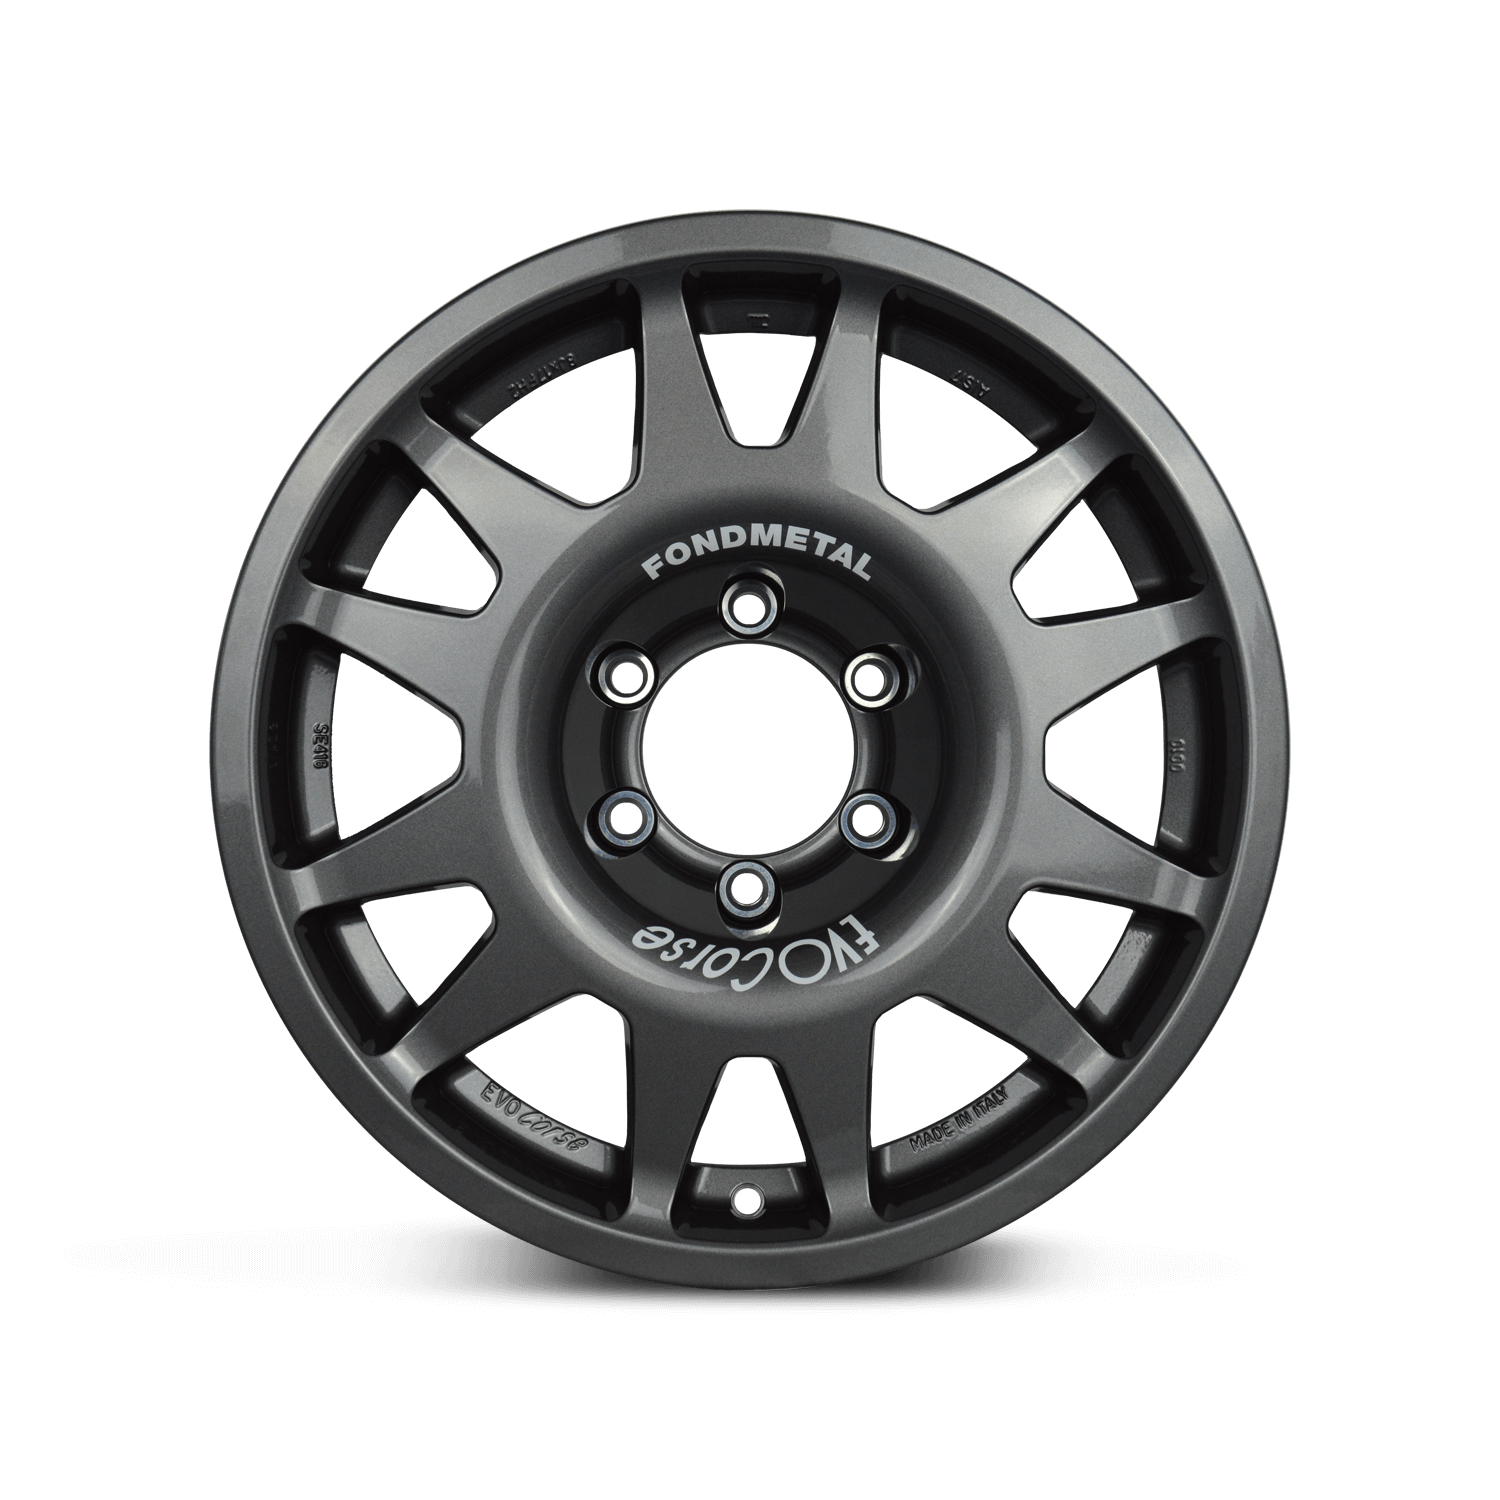 Evo Corse wheel front view in anthracite for land cruiser 200 series 8 x 17 inch ET40 strongest alloy wheel for dakar and other overlanding